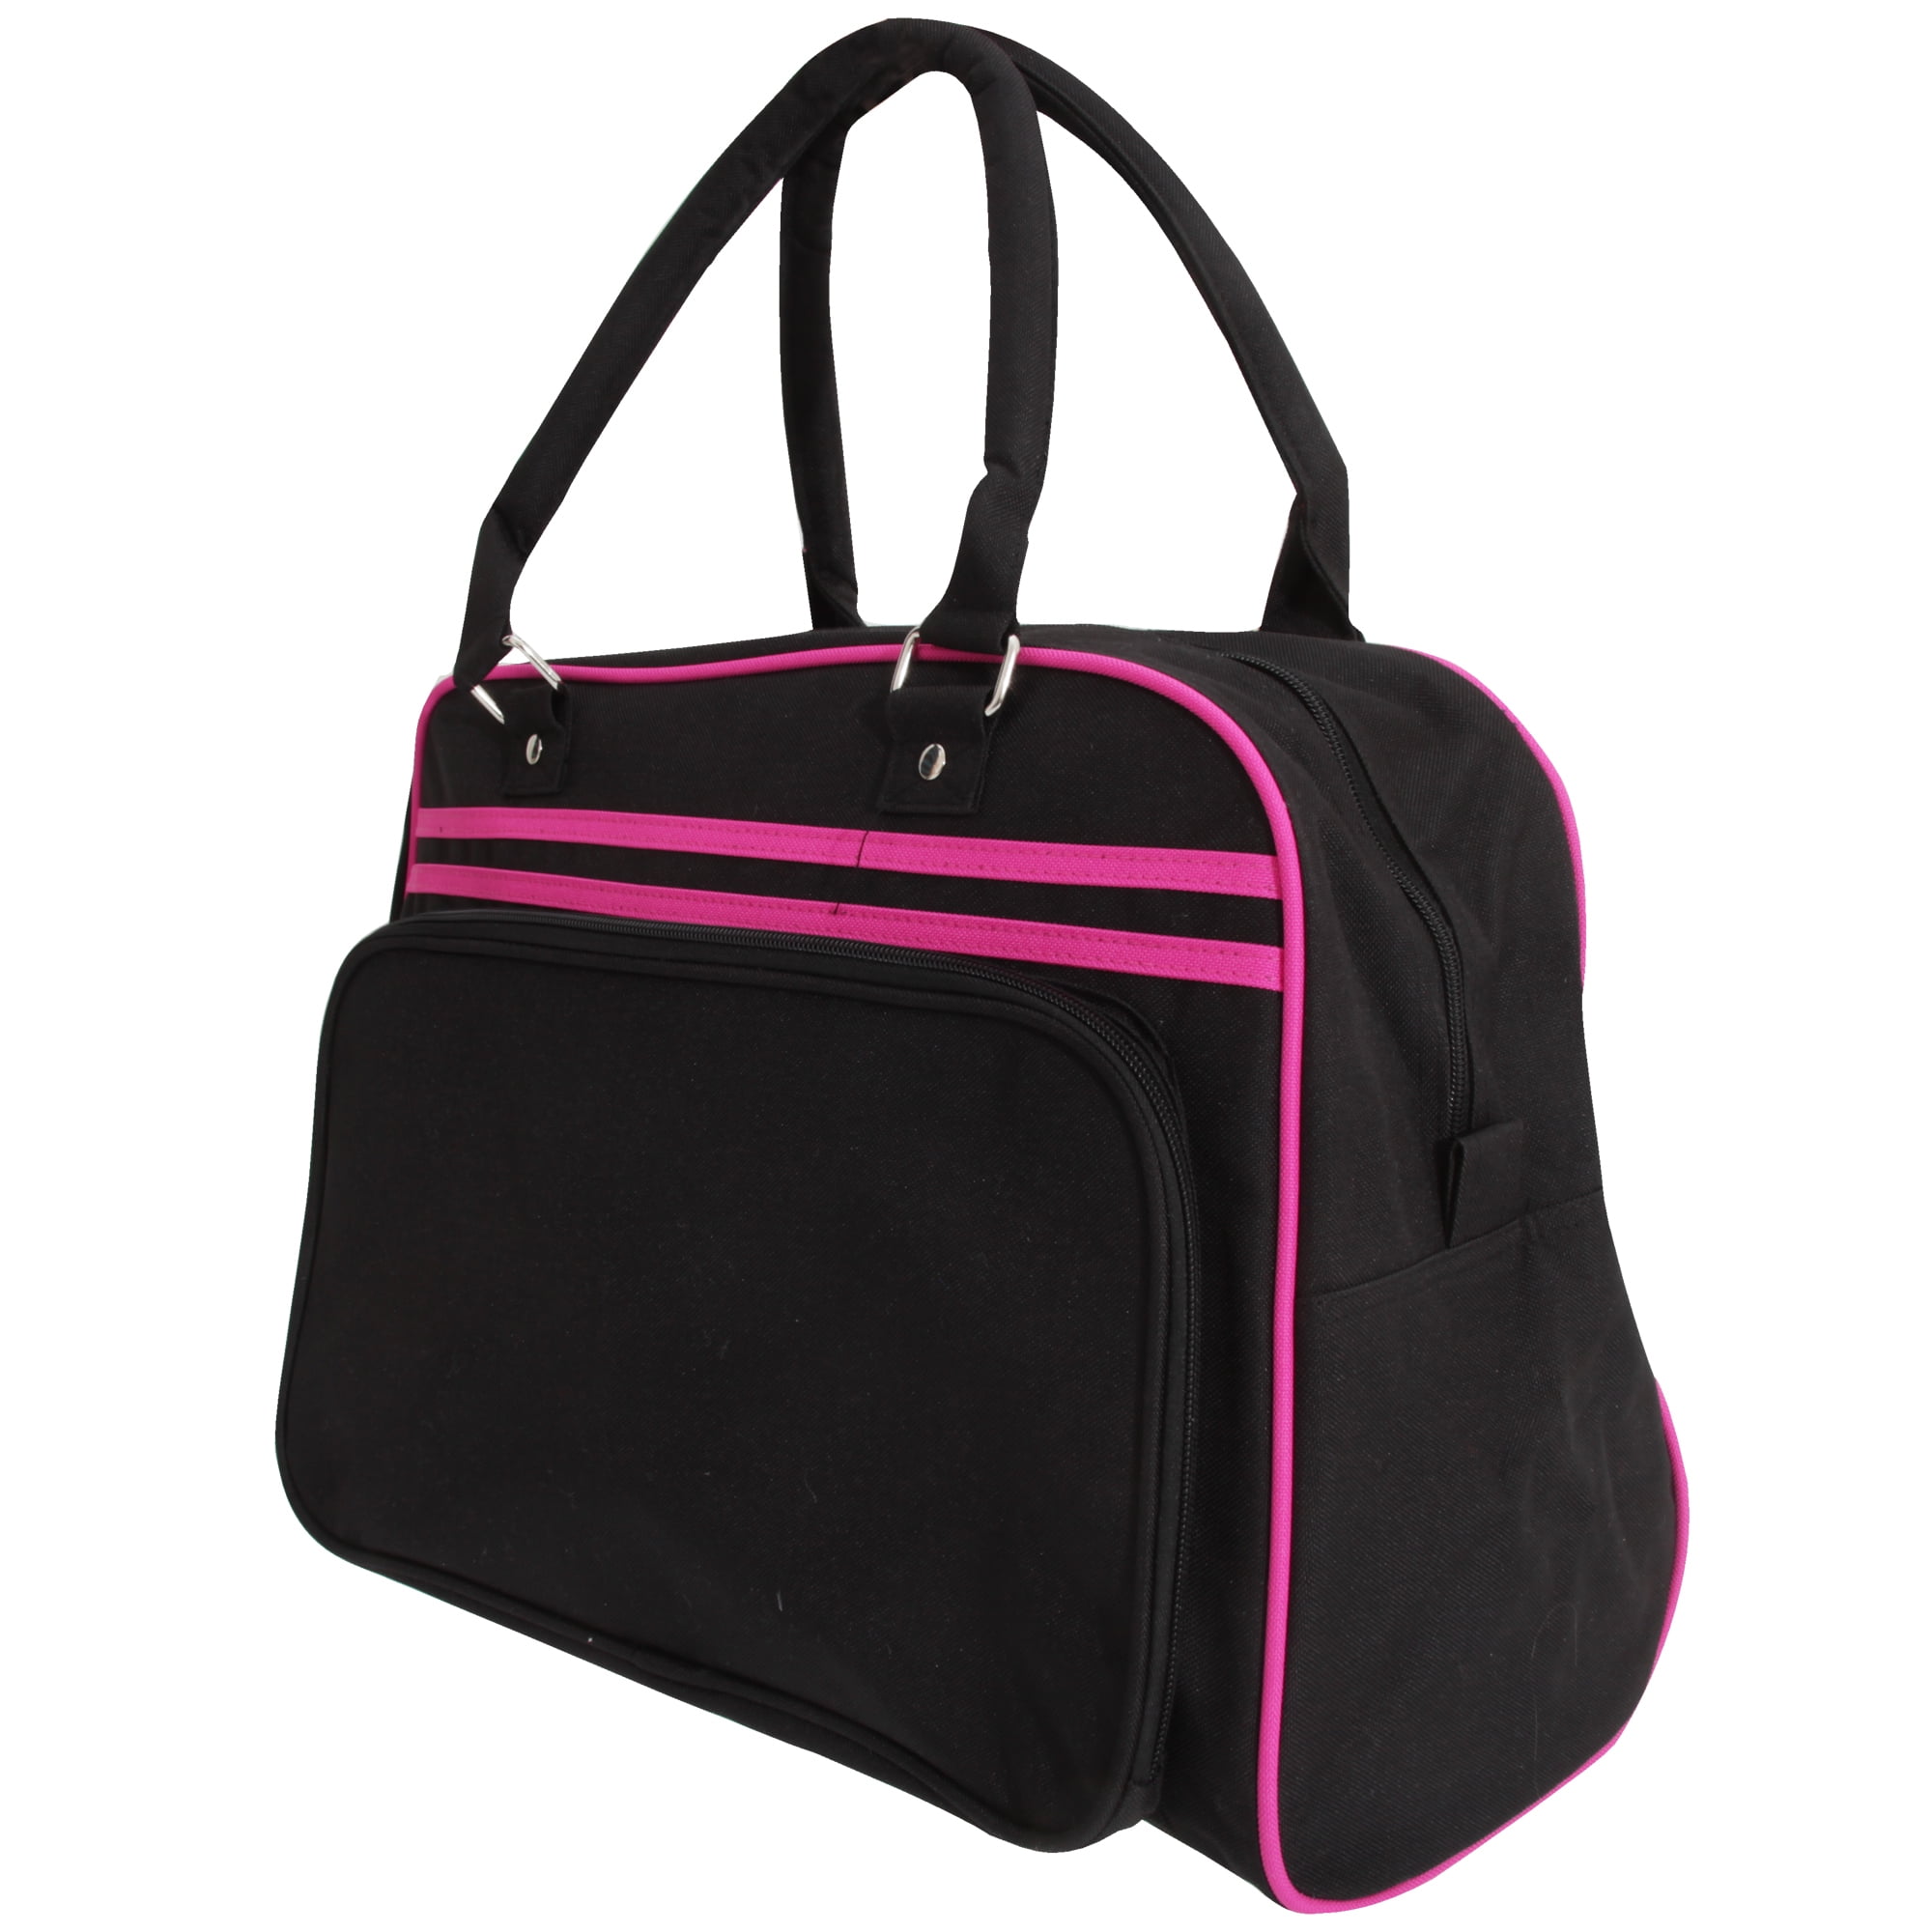 Retro Bowling Tasche44 x 31 x 25 cmBagBase 